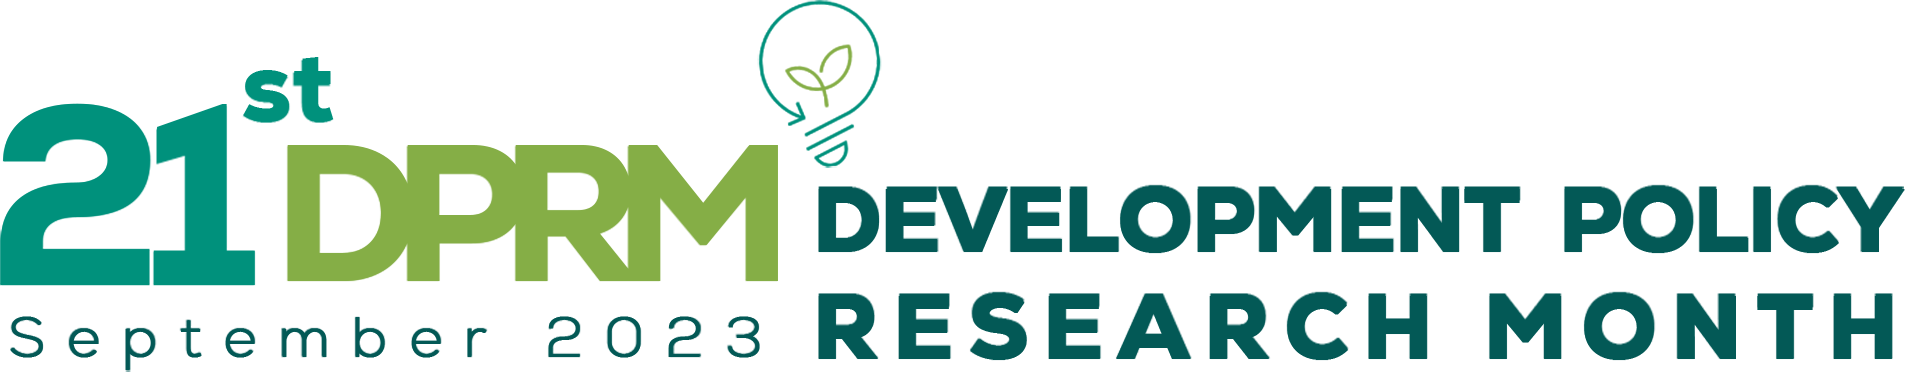 Development Policy Research Month